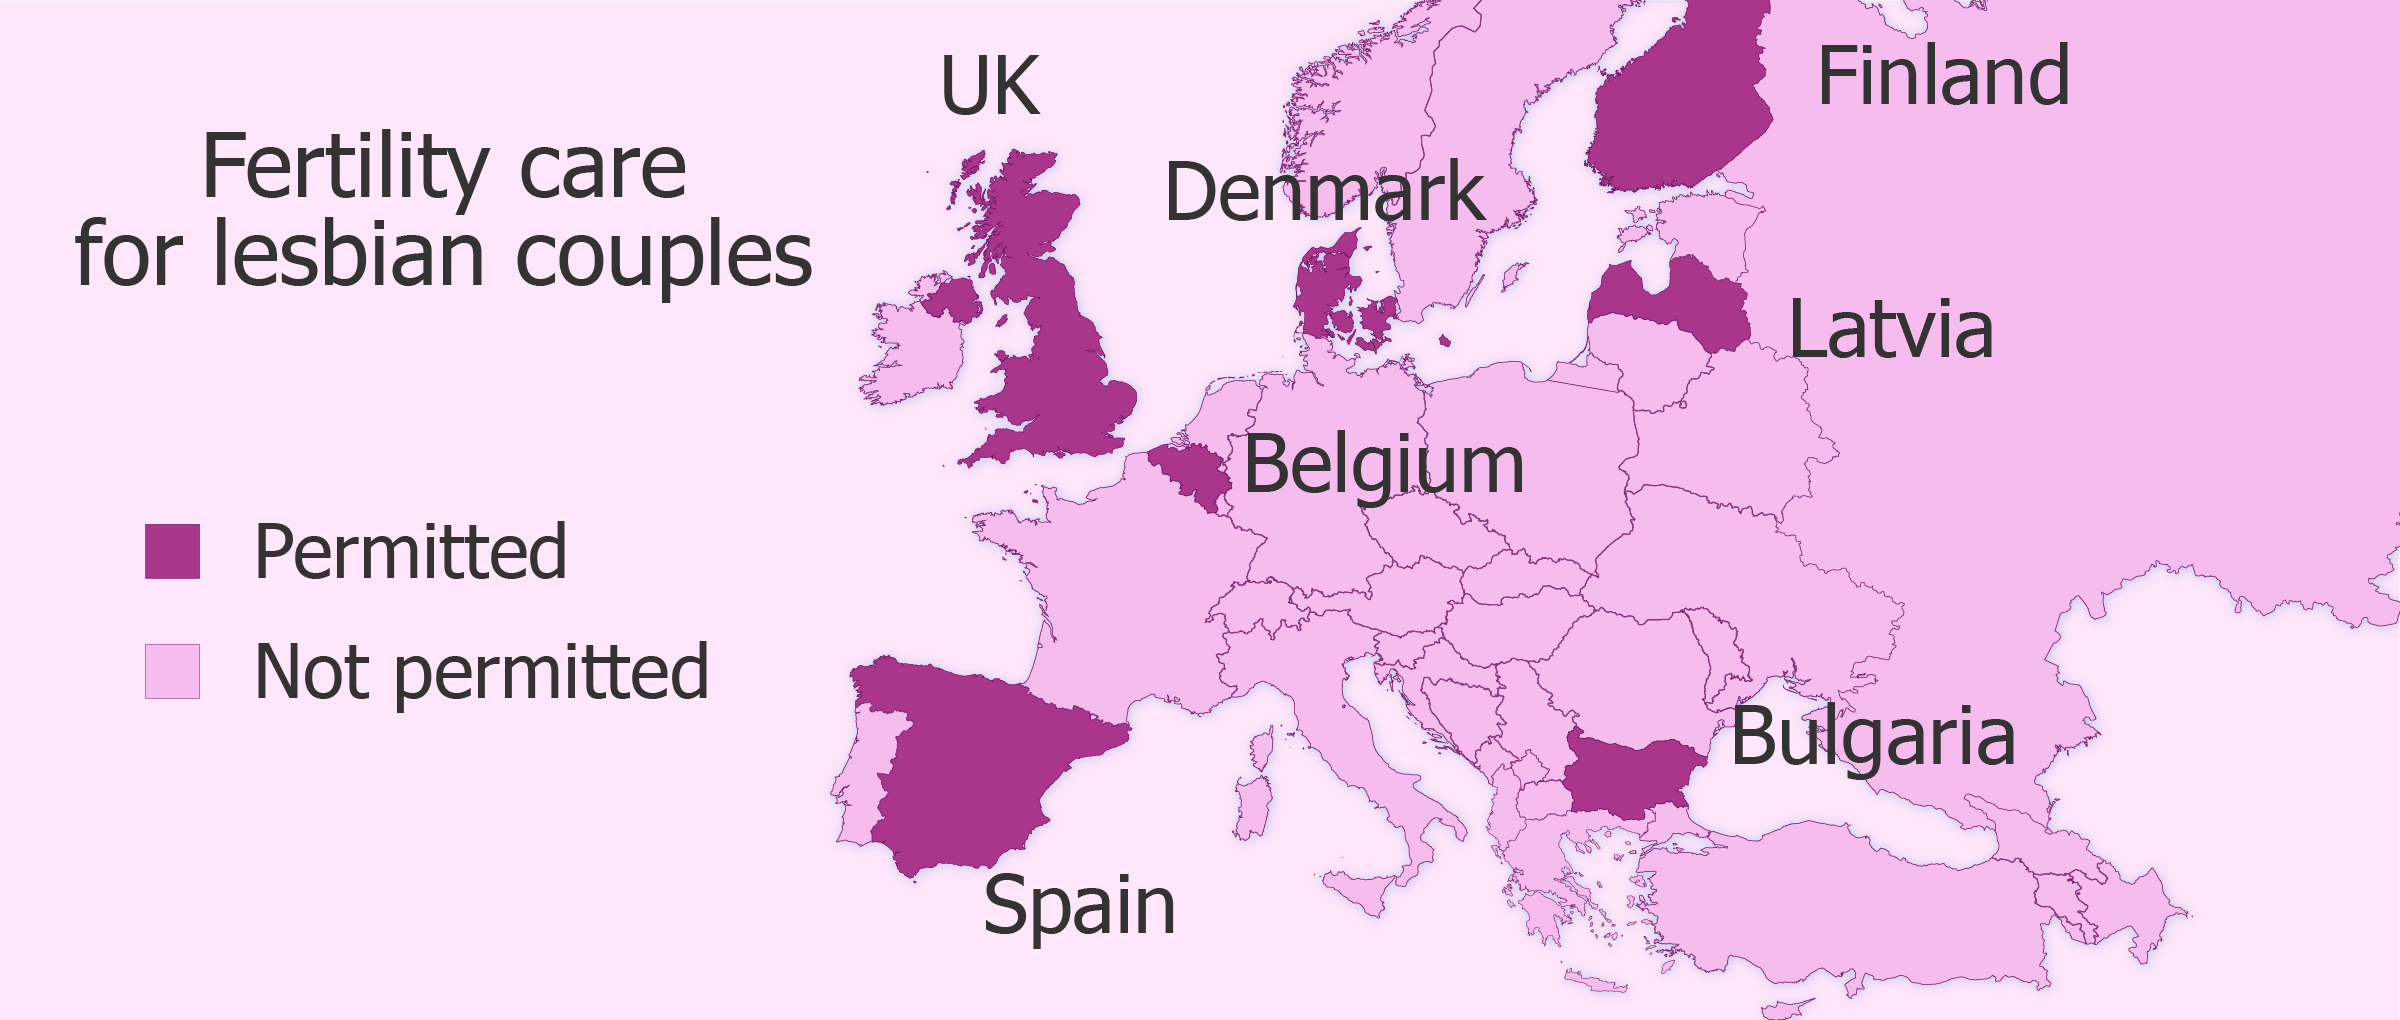 Access to fertility care for lesbian couples in Europe